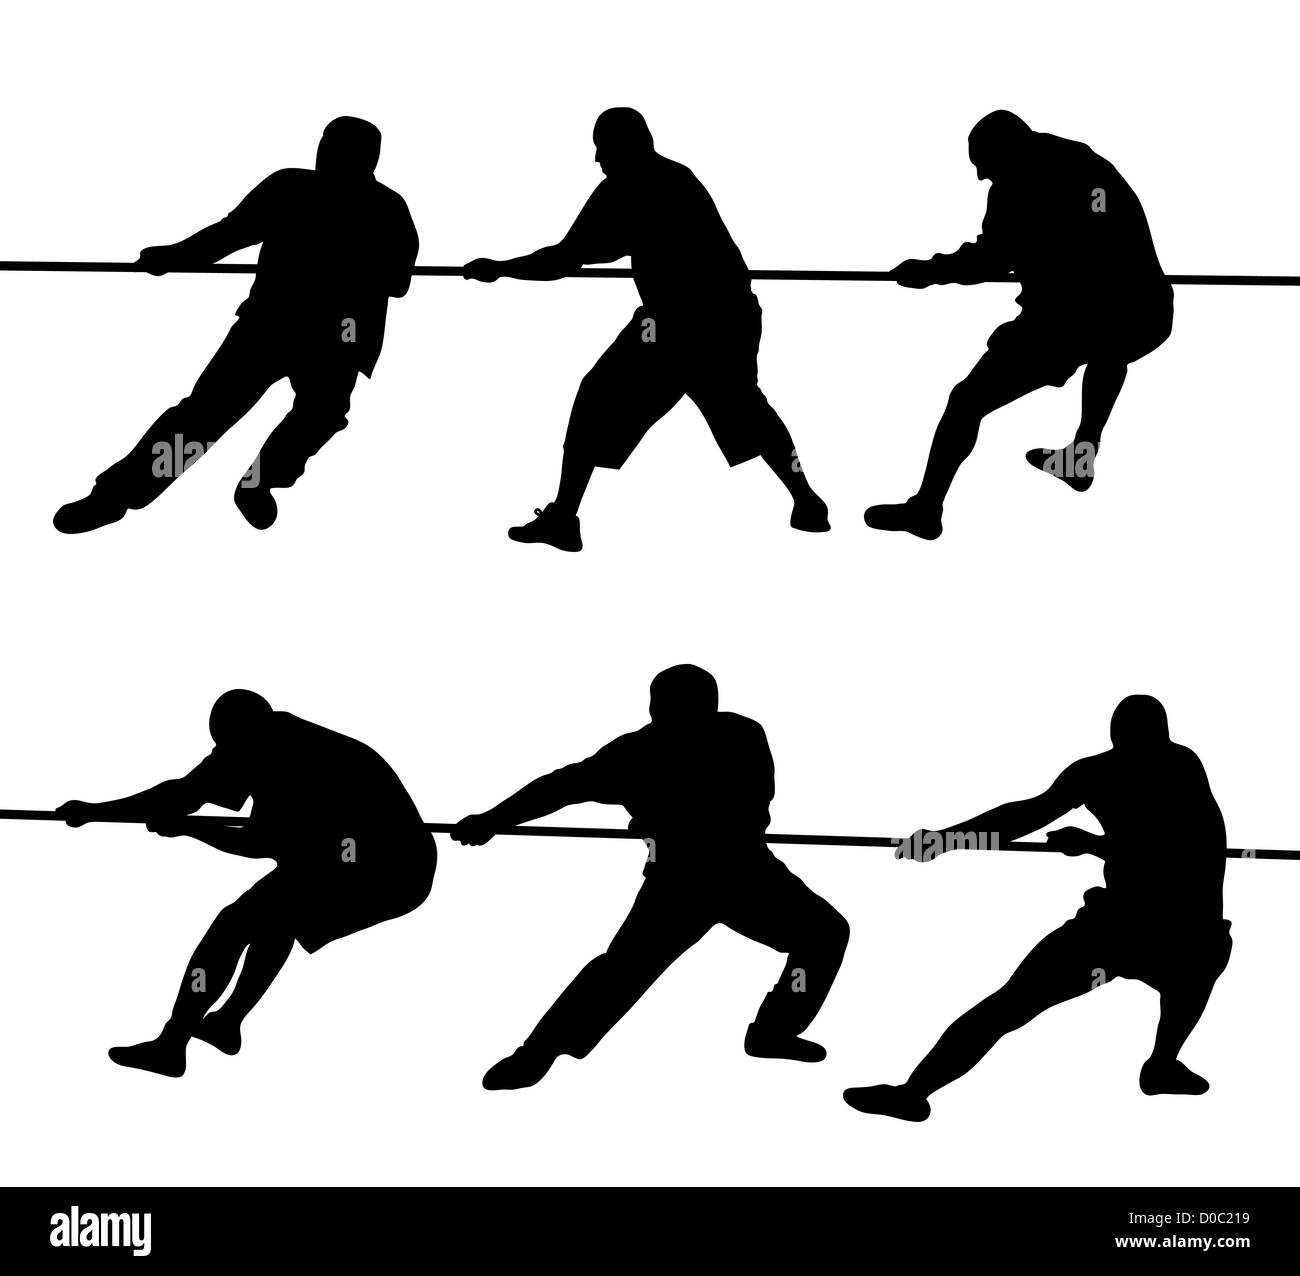 Black silhouettes of people pulling rope Stock Photo